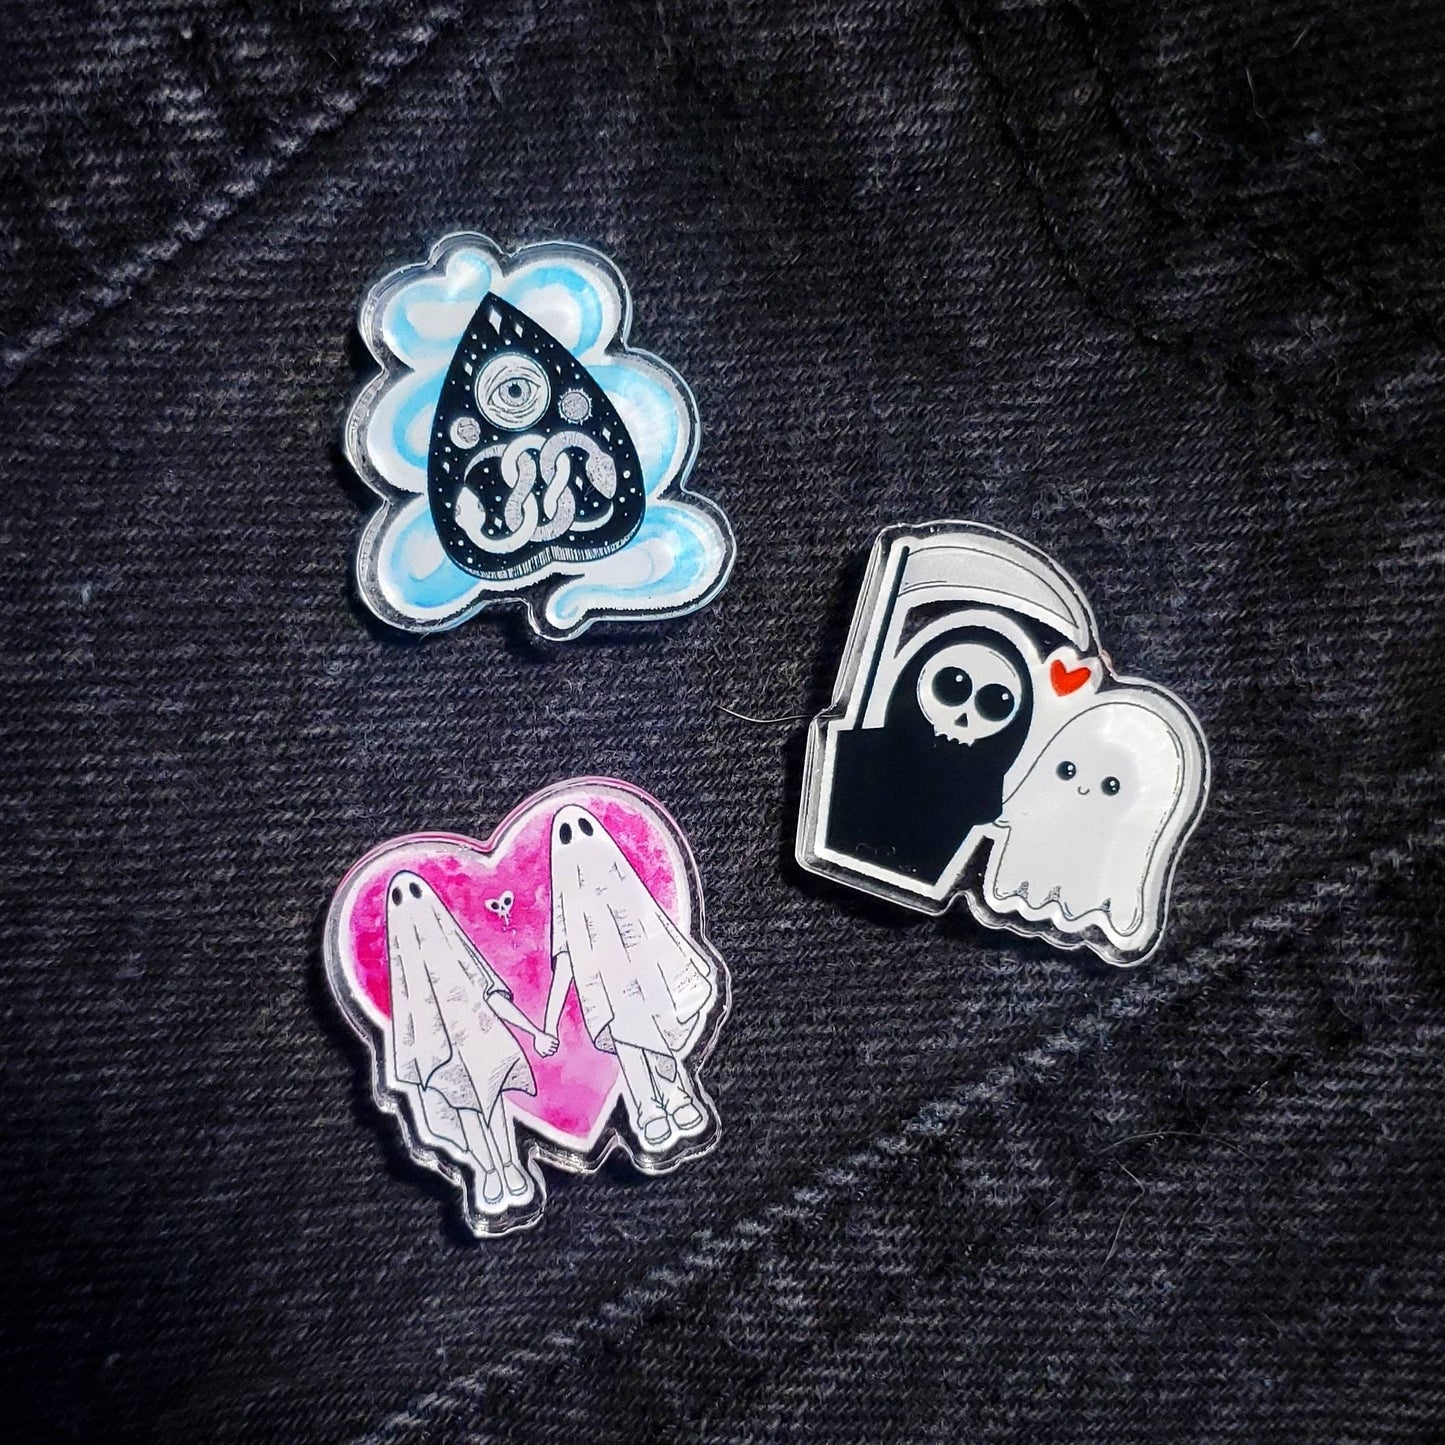 Grim and Ghost Acrylic Pin